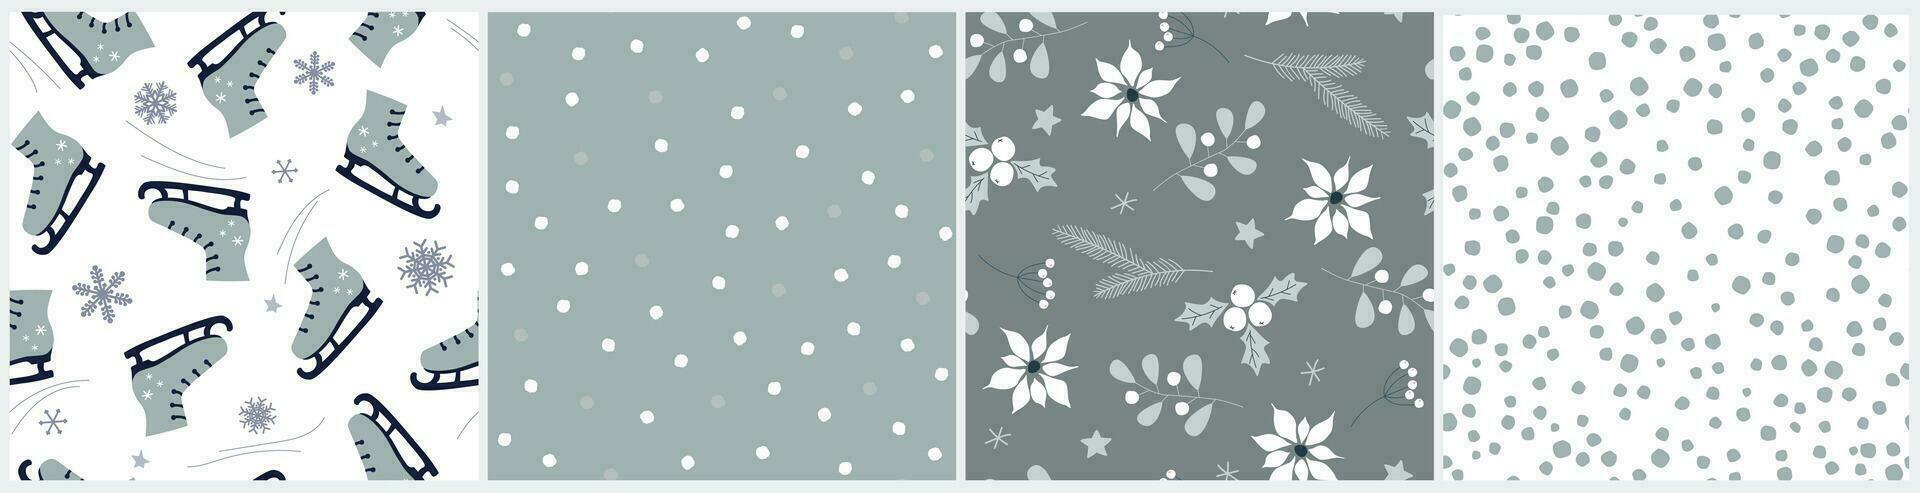 Seamless patterns with winter snowflakes, dots, poinsettia, skates, spruce branches. Festive abstract print. Vector graphics.